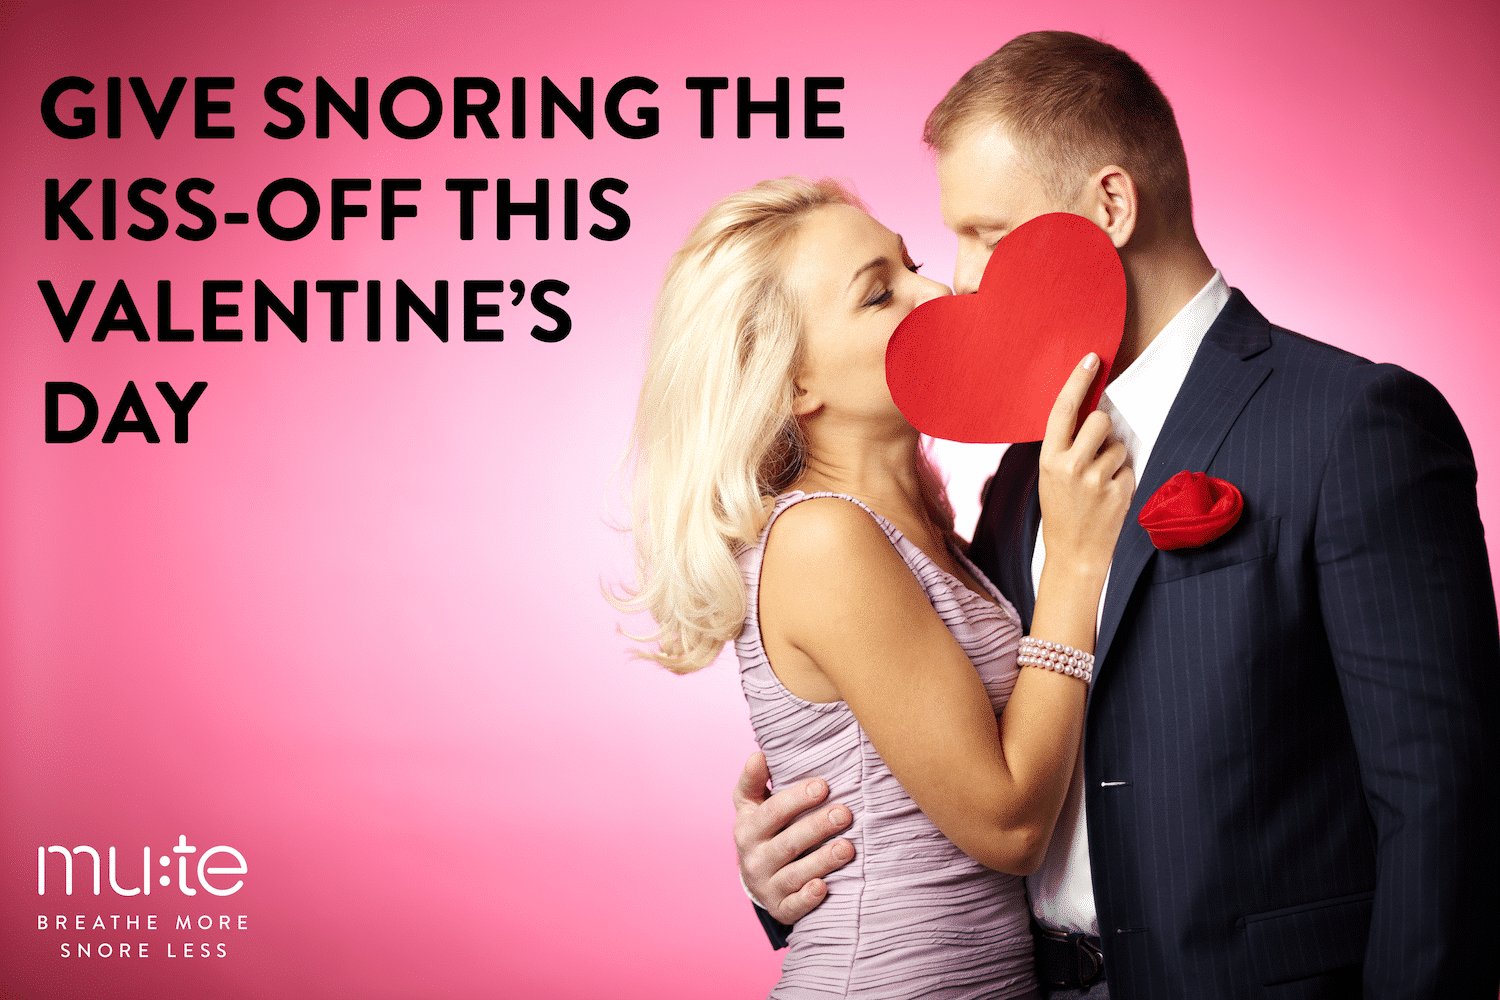 Give snoring the kiss-off this Valentine’s Day